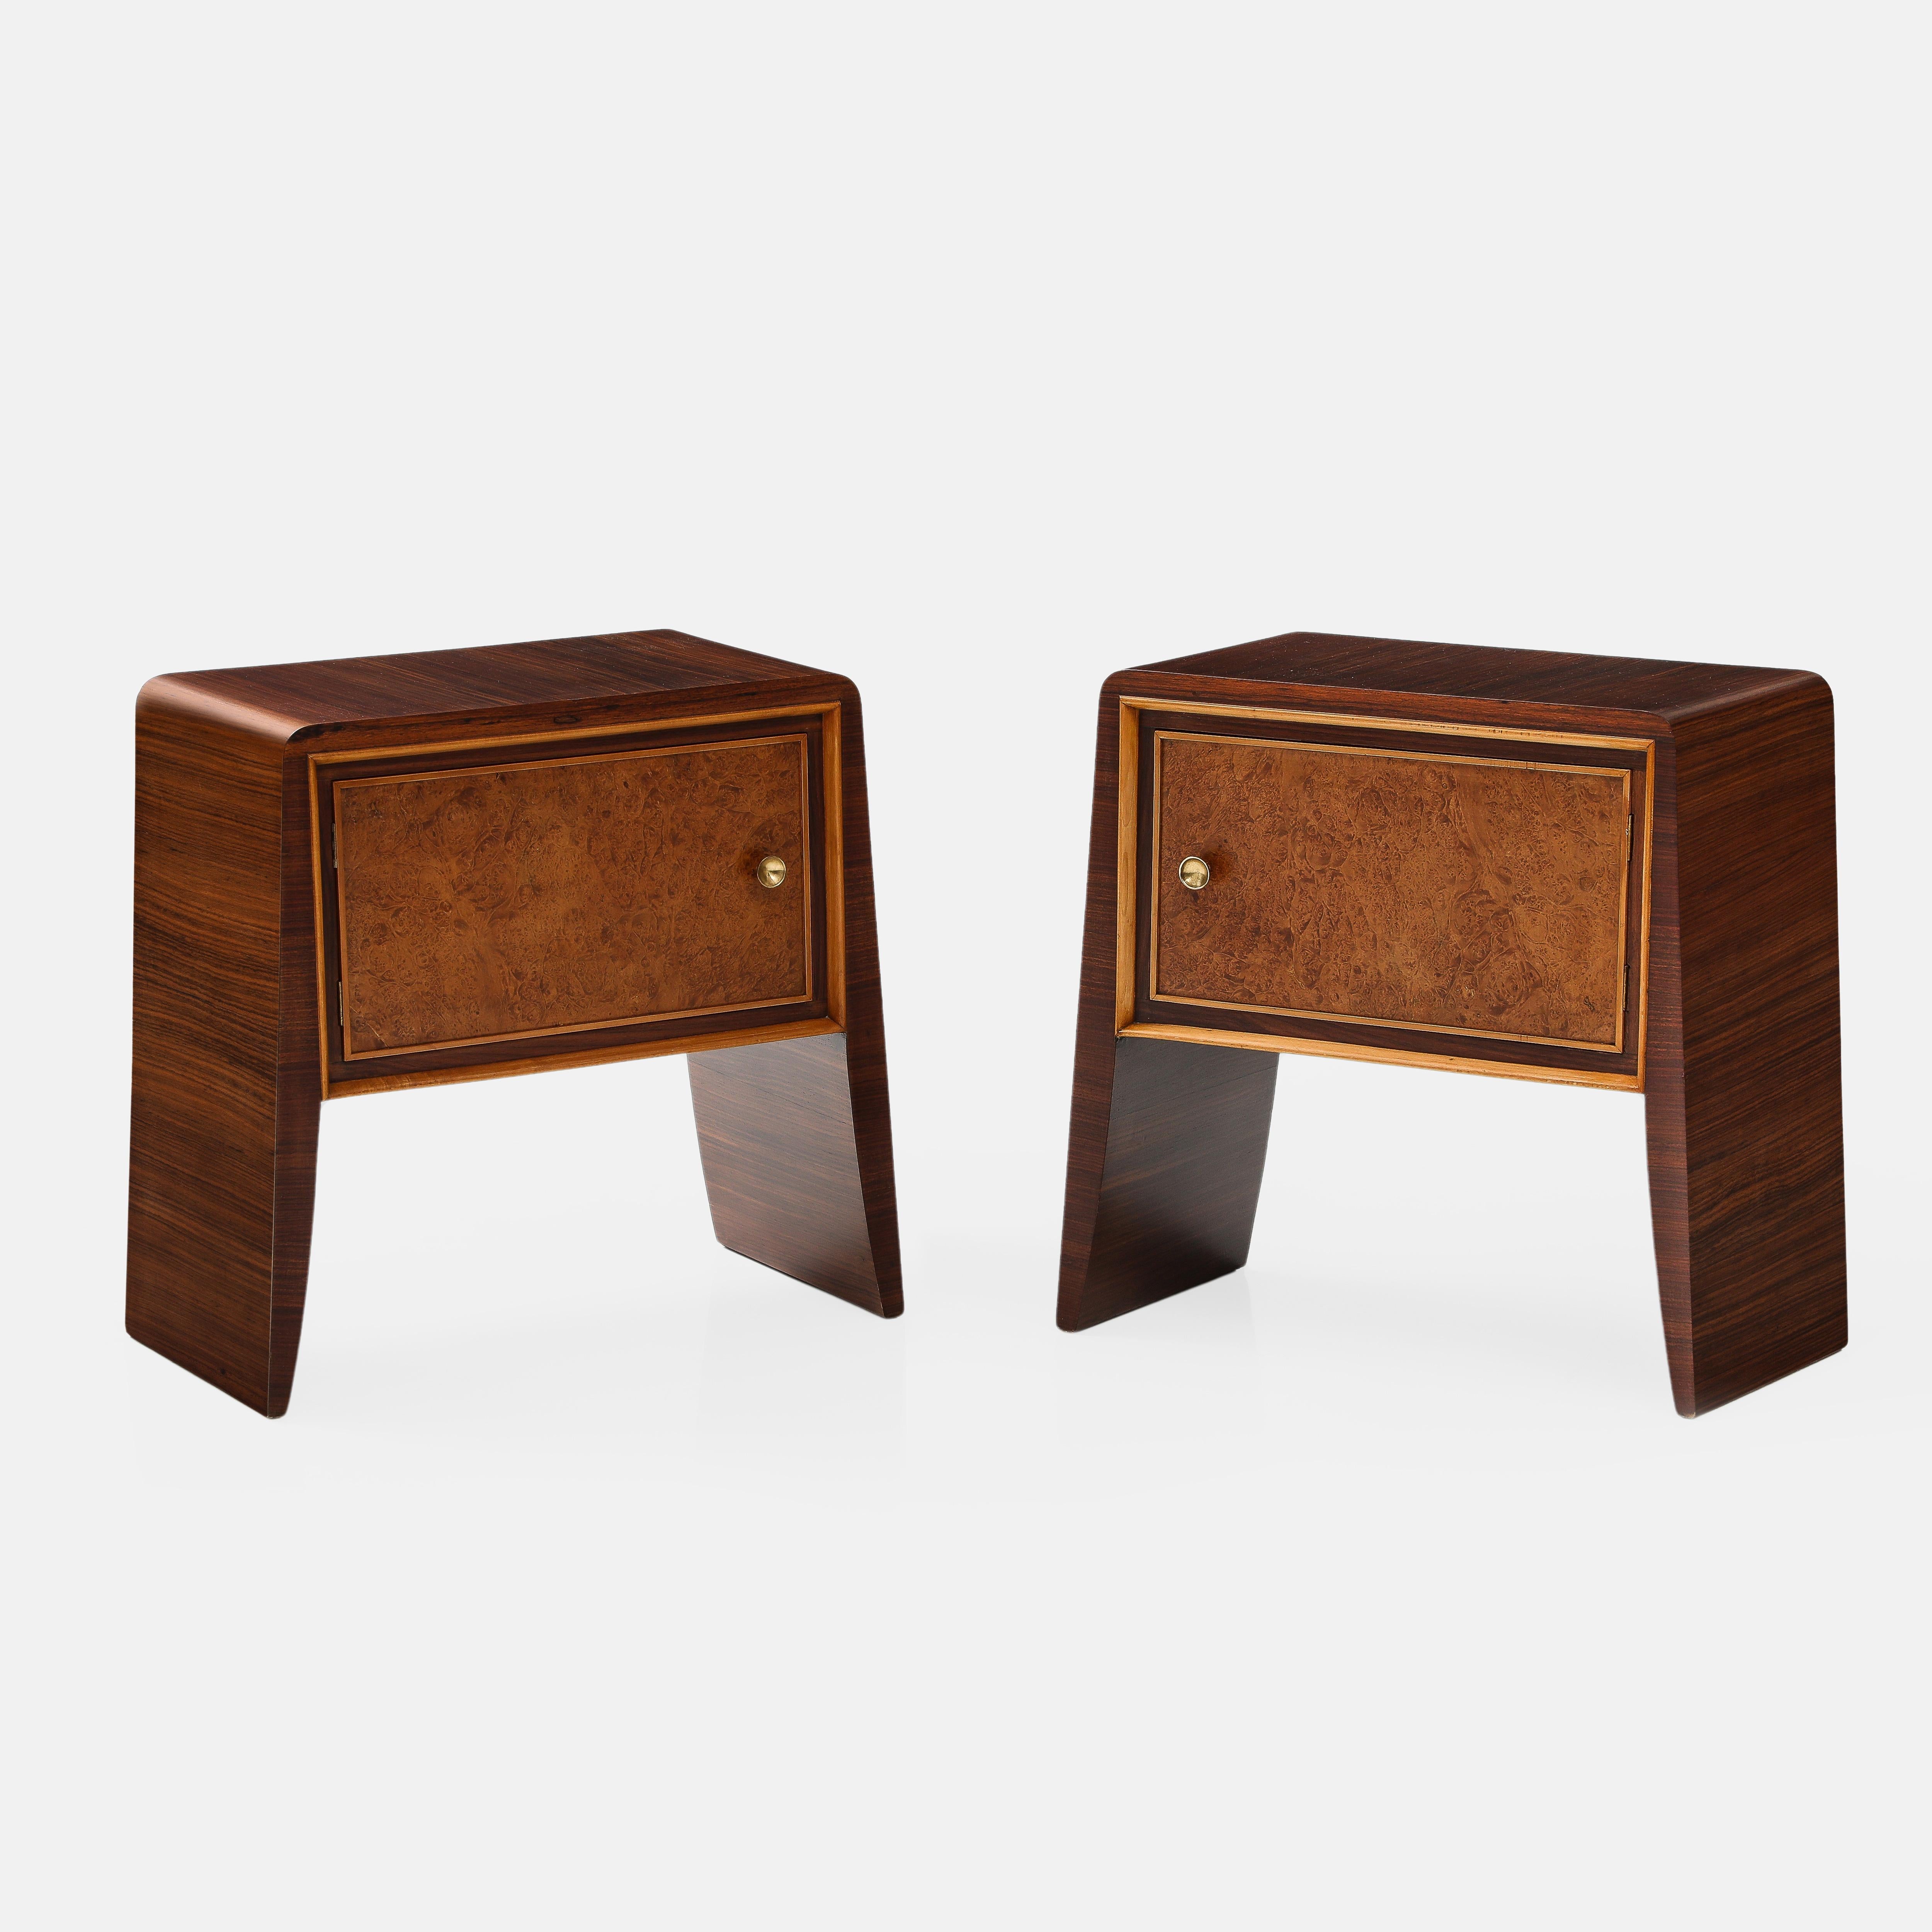 1950s pair of waterfall nightstands or bedside tables in rosewood and birchwood each with one door cabinet and brass knob, attributed to Paolo Buffa. These elegant end tables have lovely curved corners with draping sides that cascade and slightly